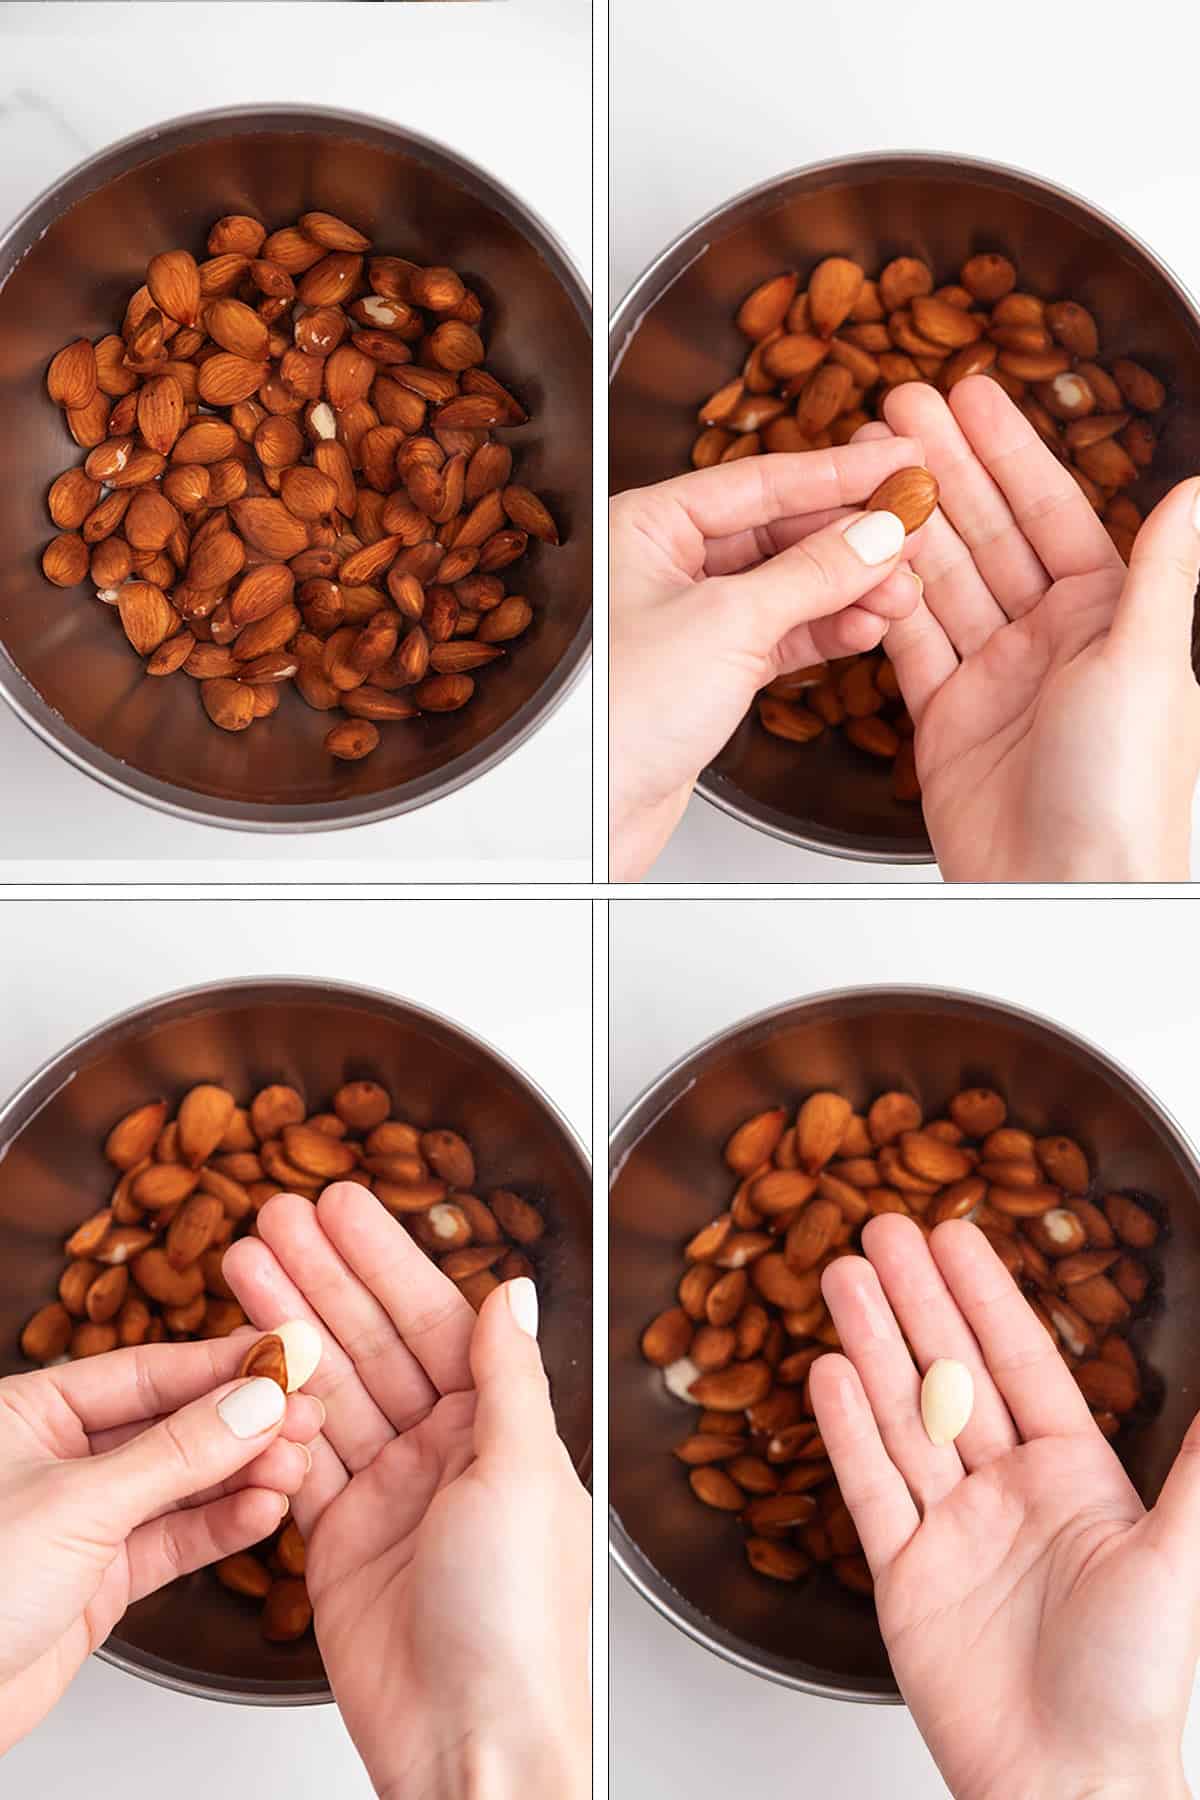 How To Skin Almonds